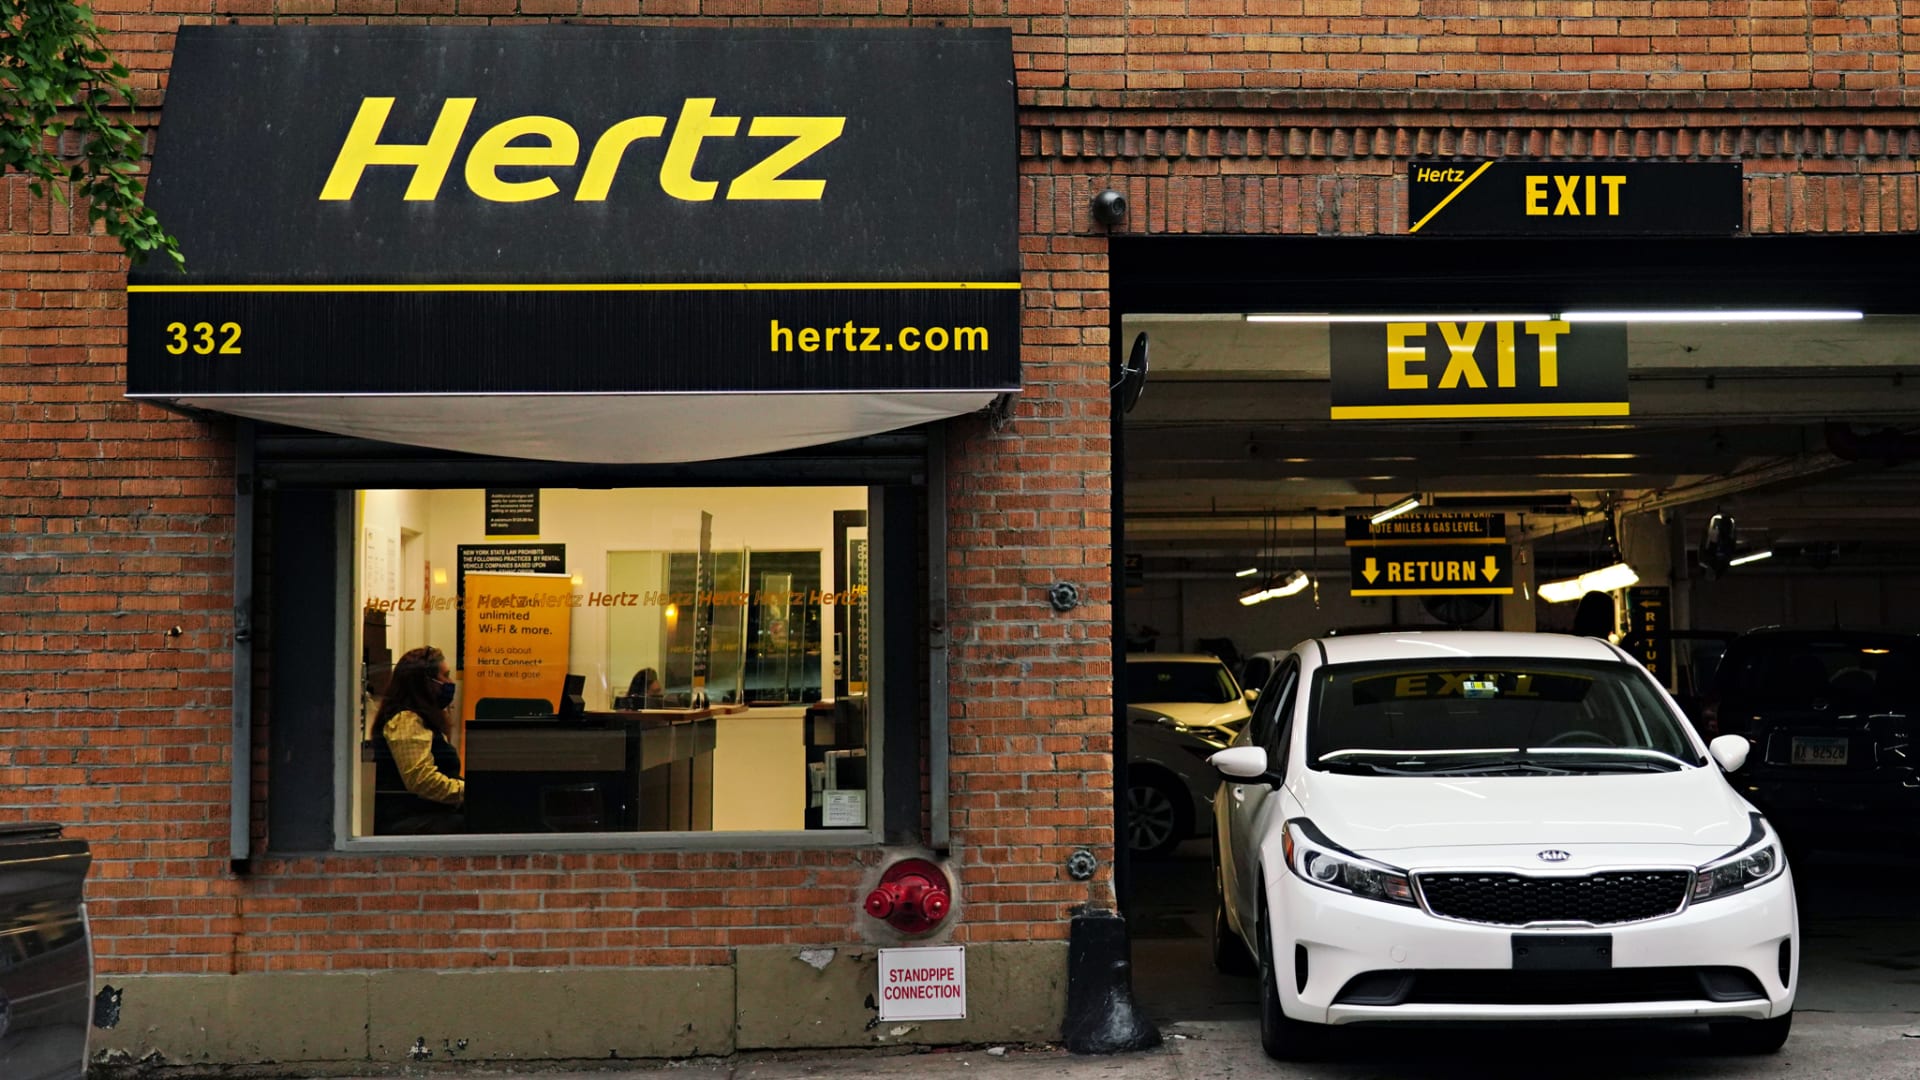 A Hertz Lawyer Just Said 6 Words the Company Should Hope Its Customers Never Hear